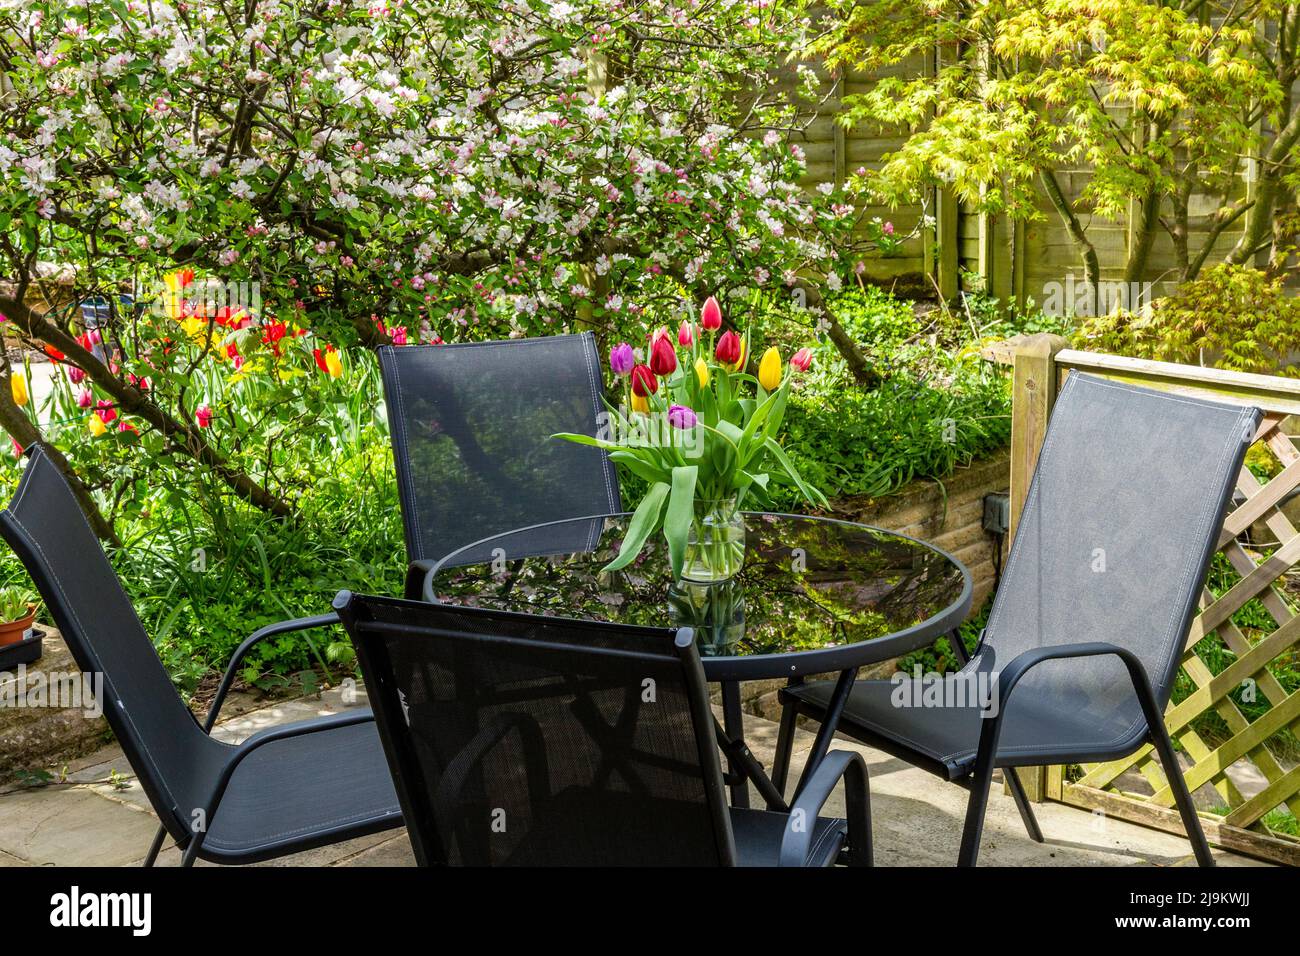 An English garden in spring. A vase of tulips is displayed on the glass garden table. Apple trees in blossom are in the background. Stock Photo